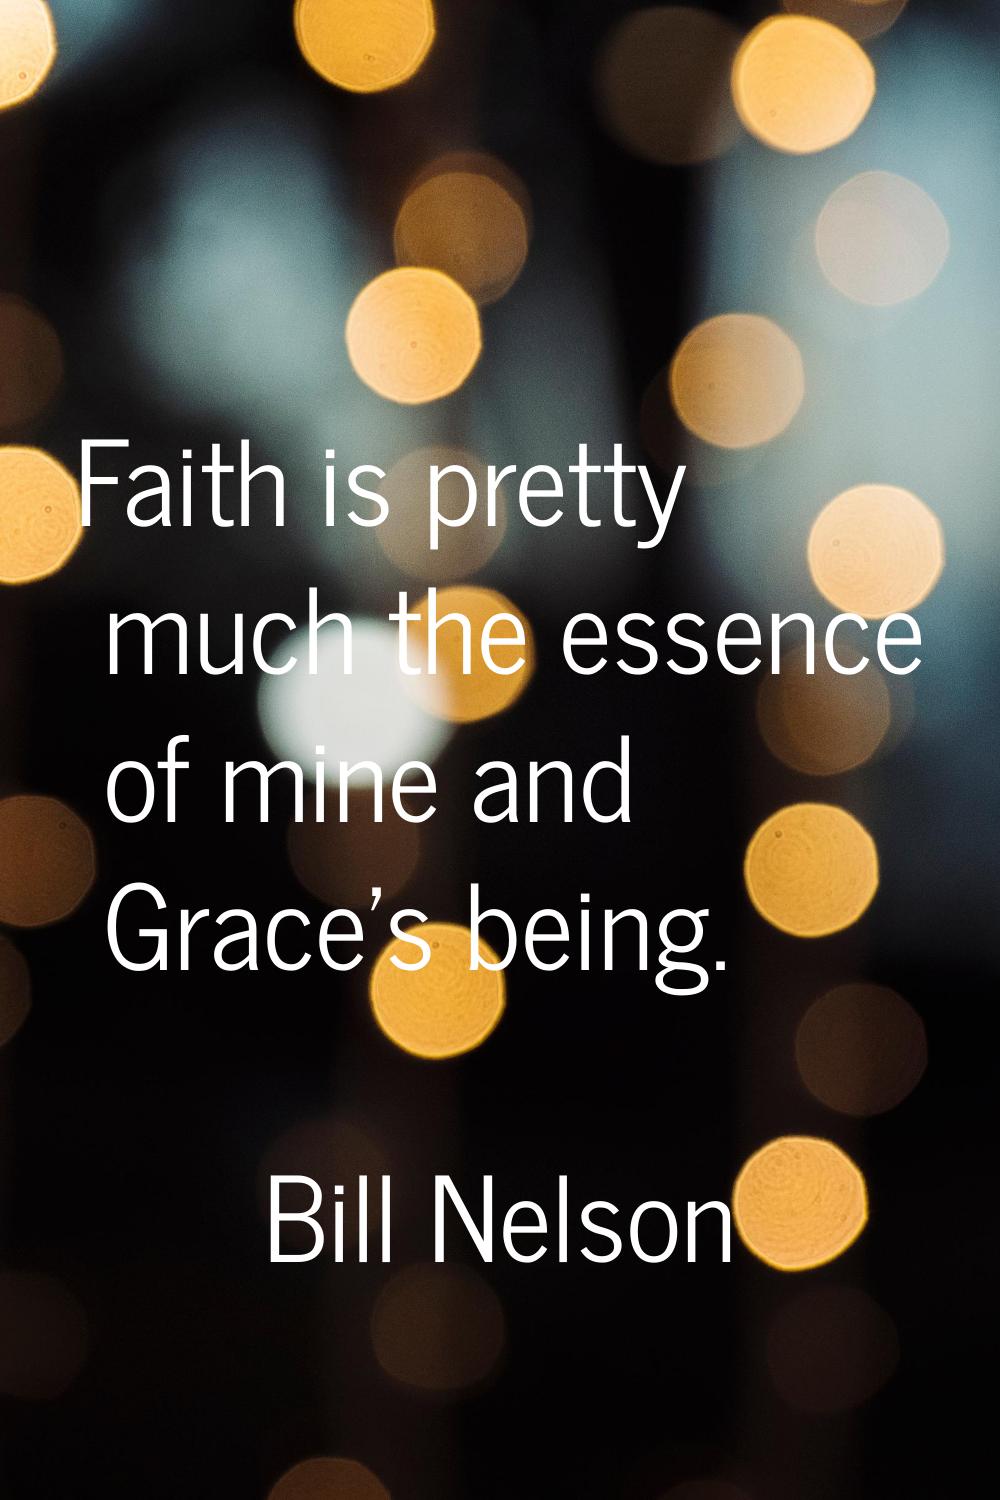 Faith is pretty much the essence of mine and Grace's being.